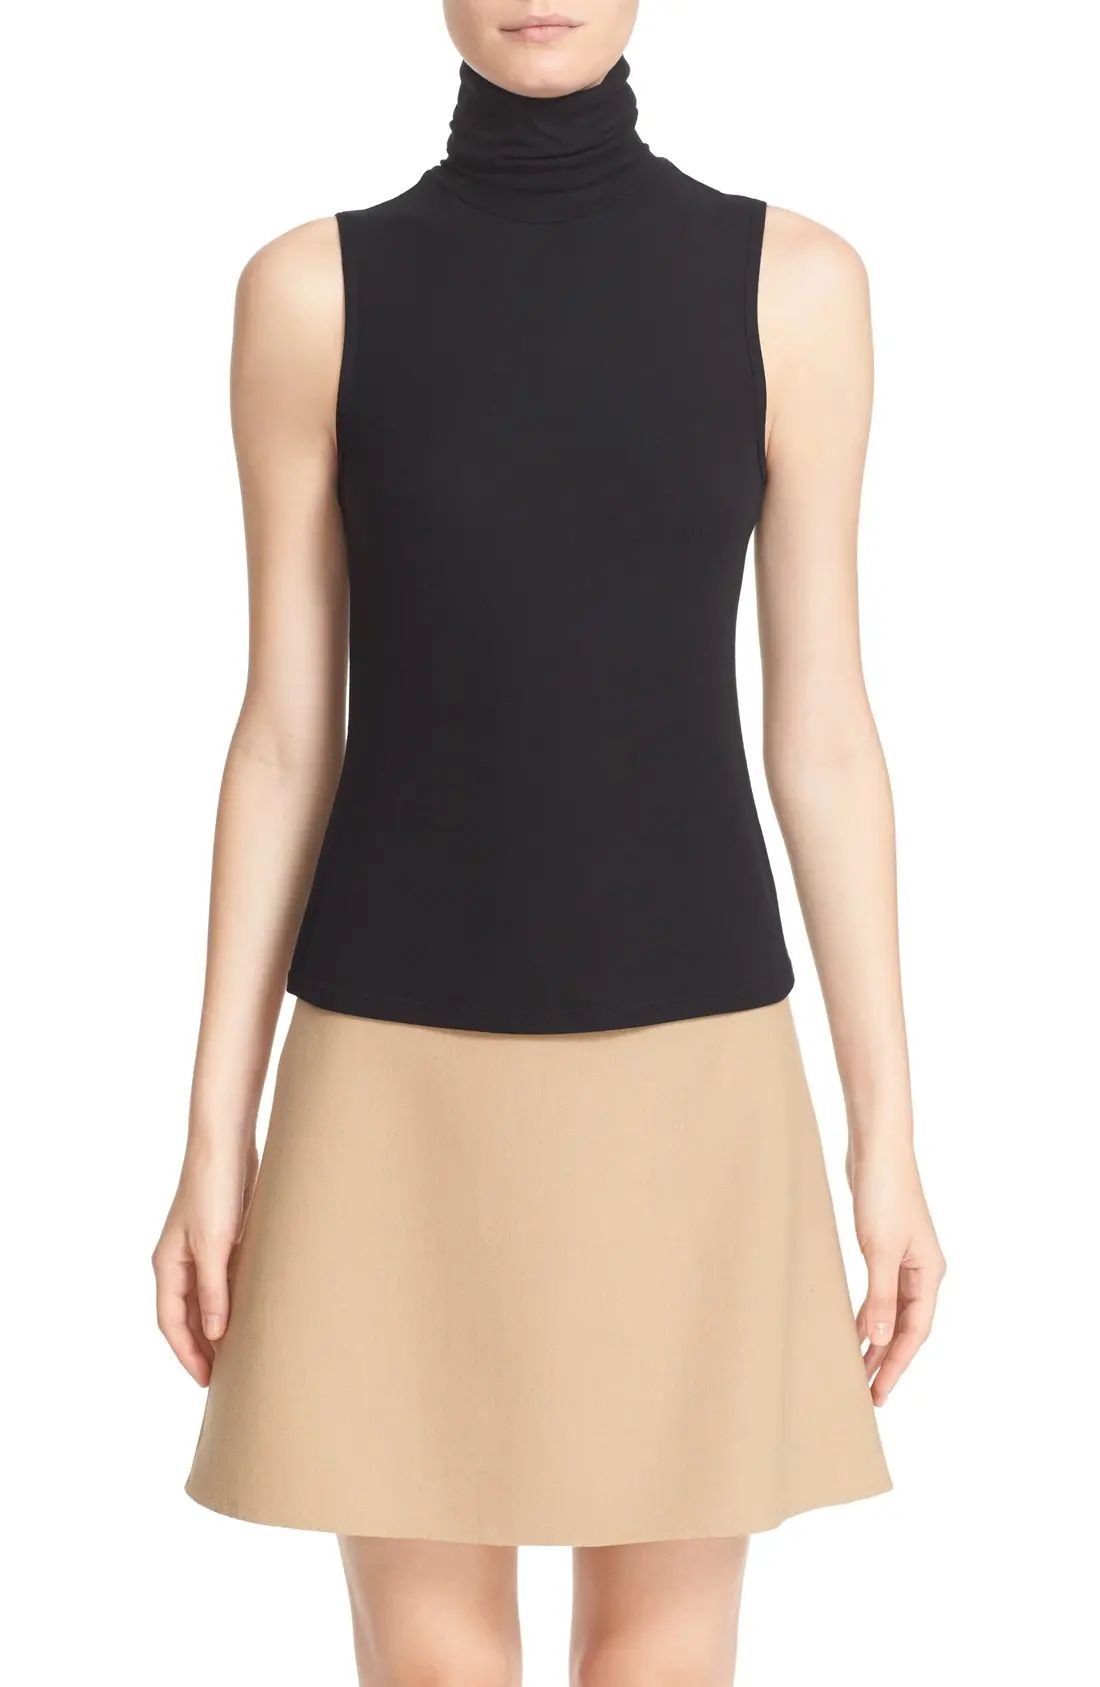 Theory 'Wendel' Sleeveless Turtleneck Top in Black at Nordstrom, Size Petite | Nordstrom